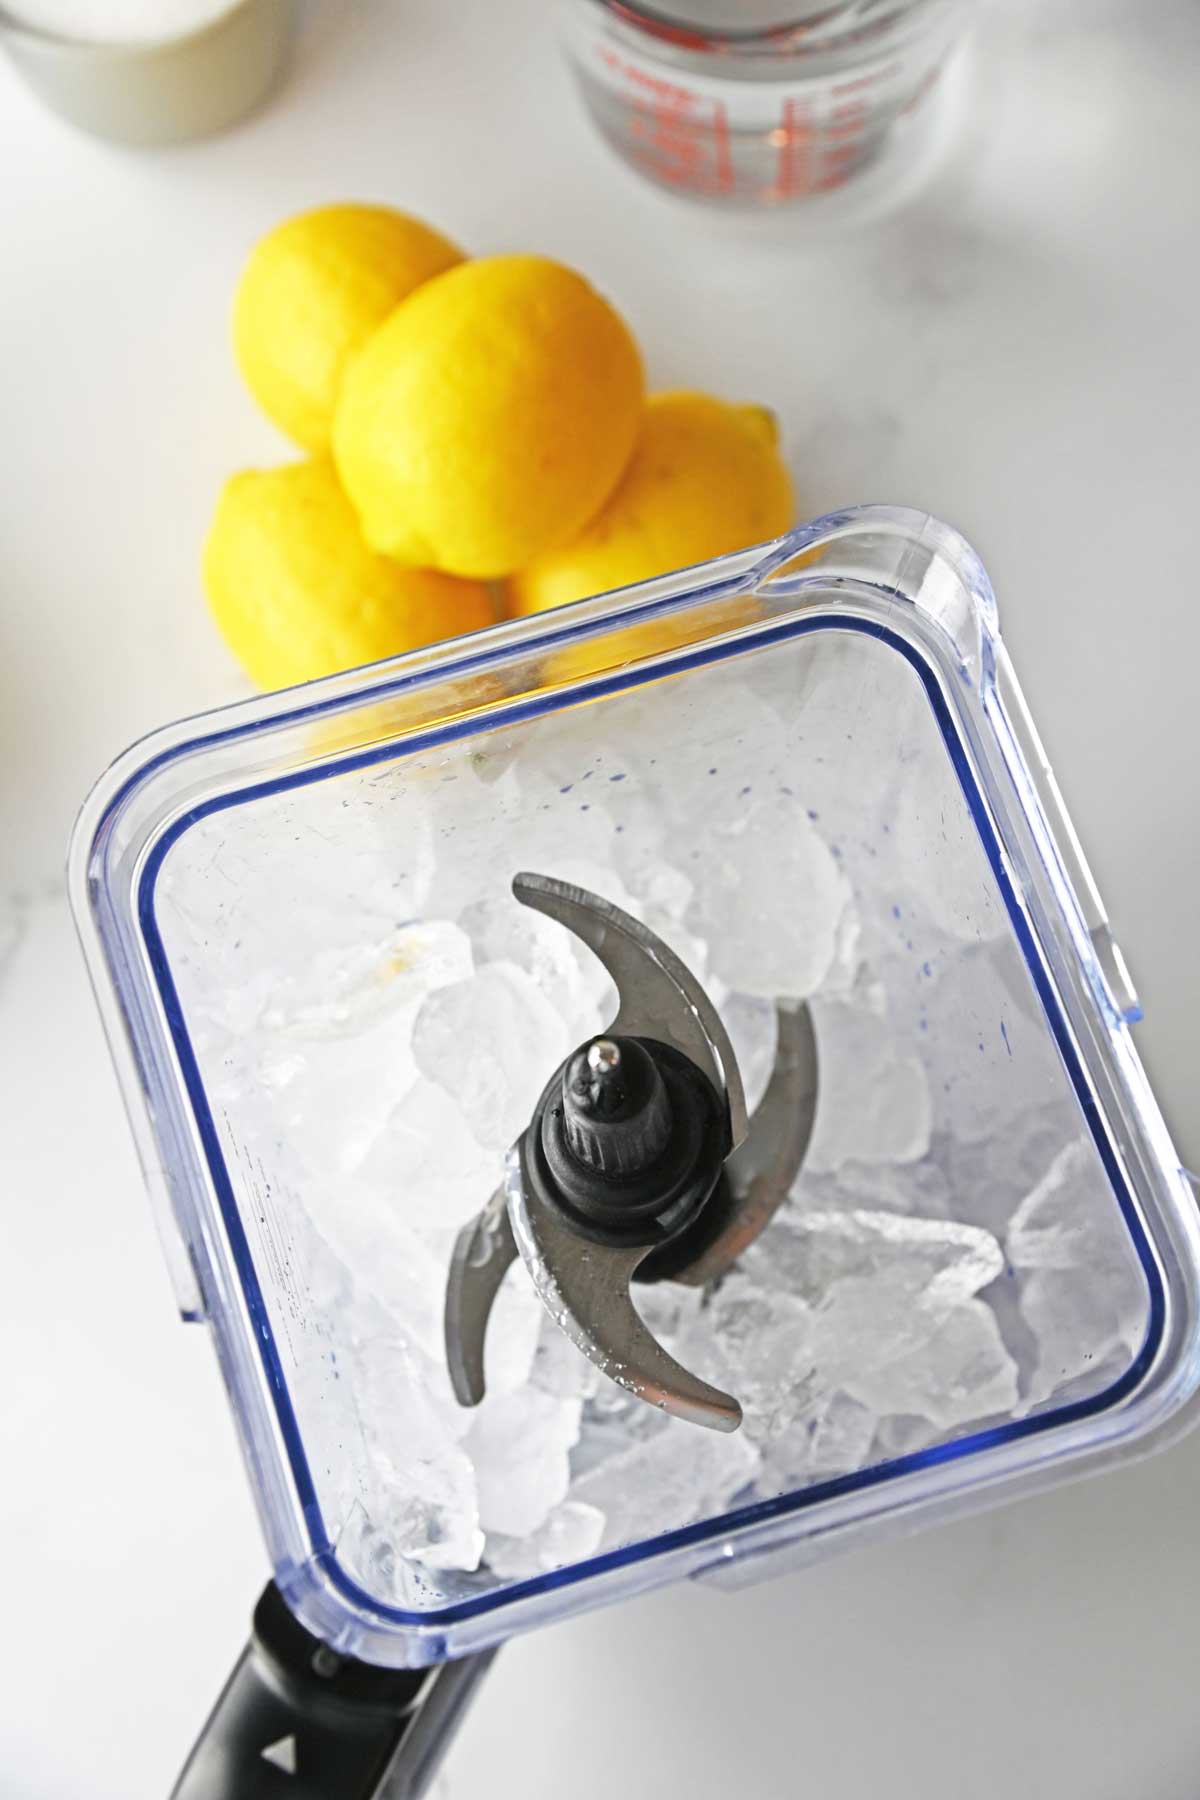 The process of preparing Lemonade Slushie is to add an ice.